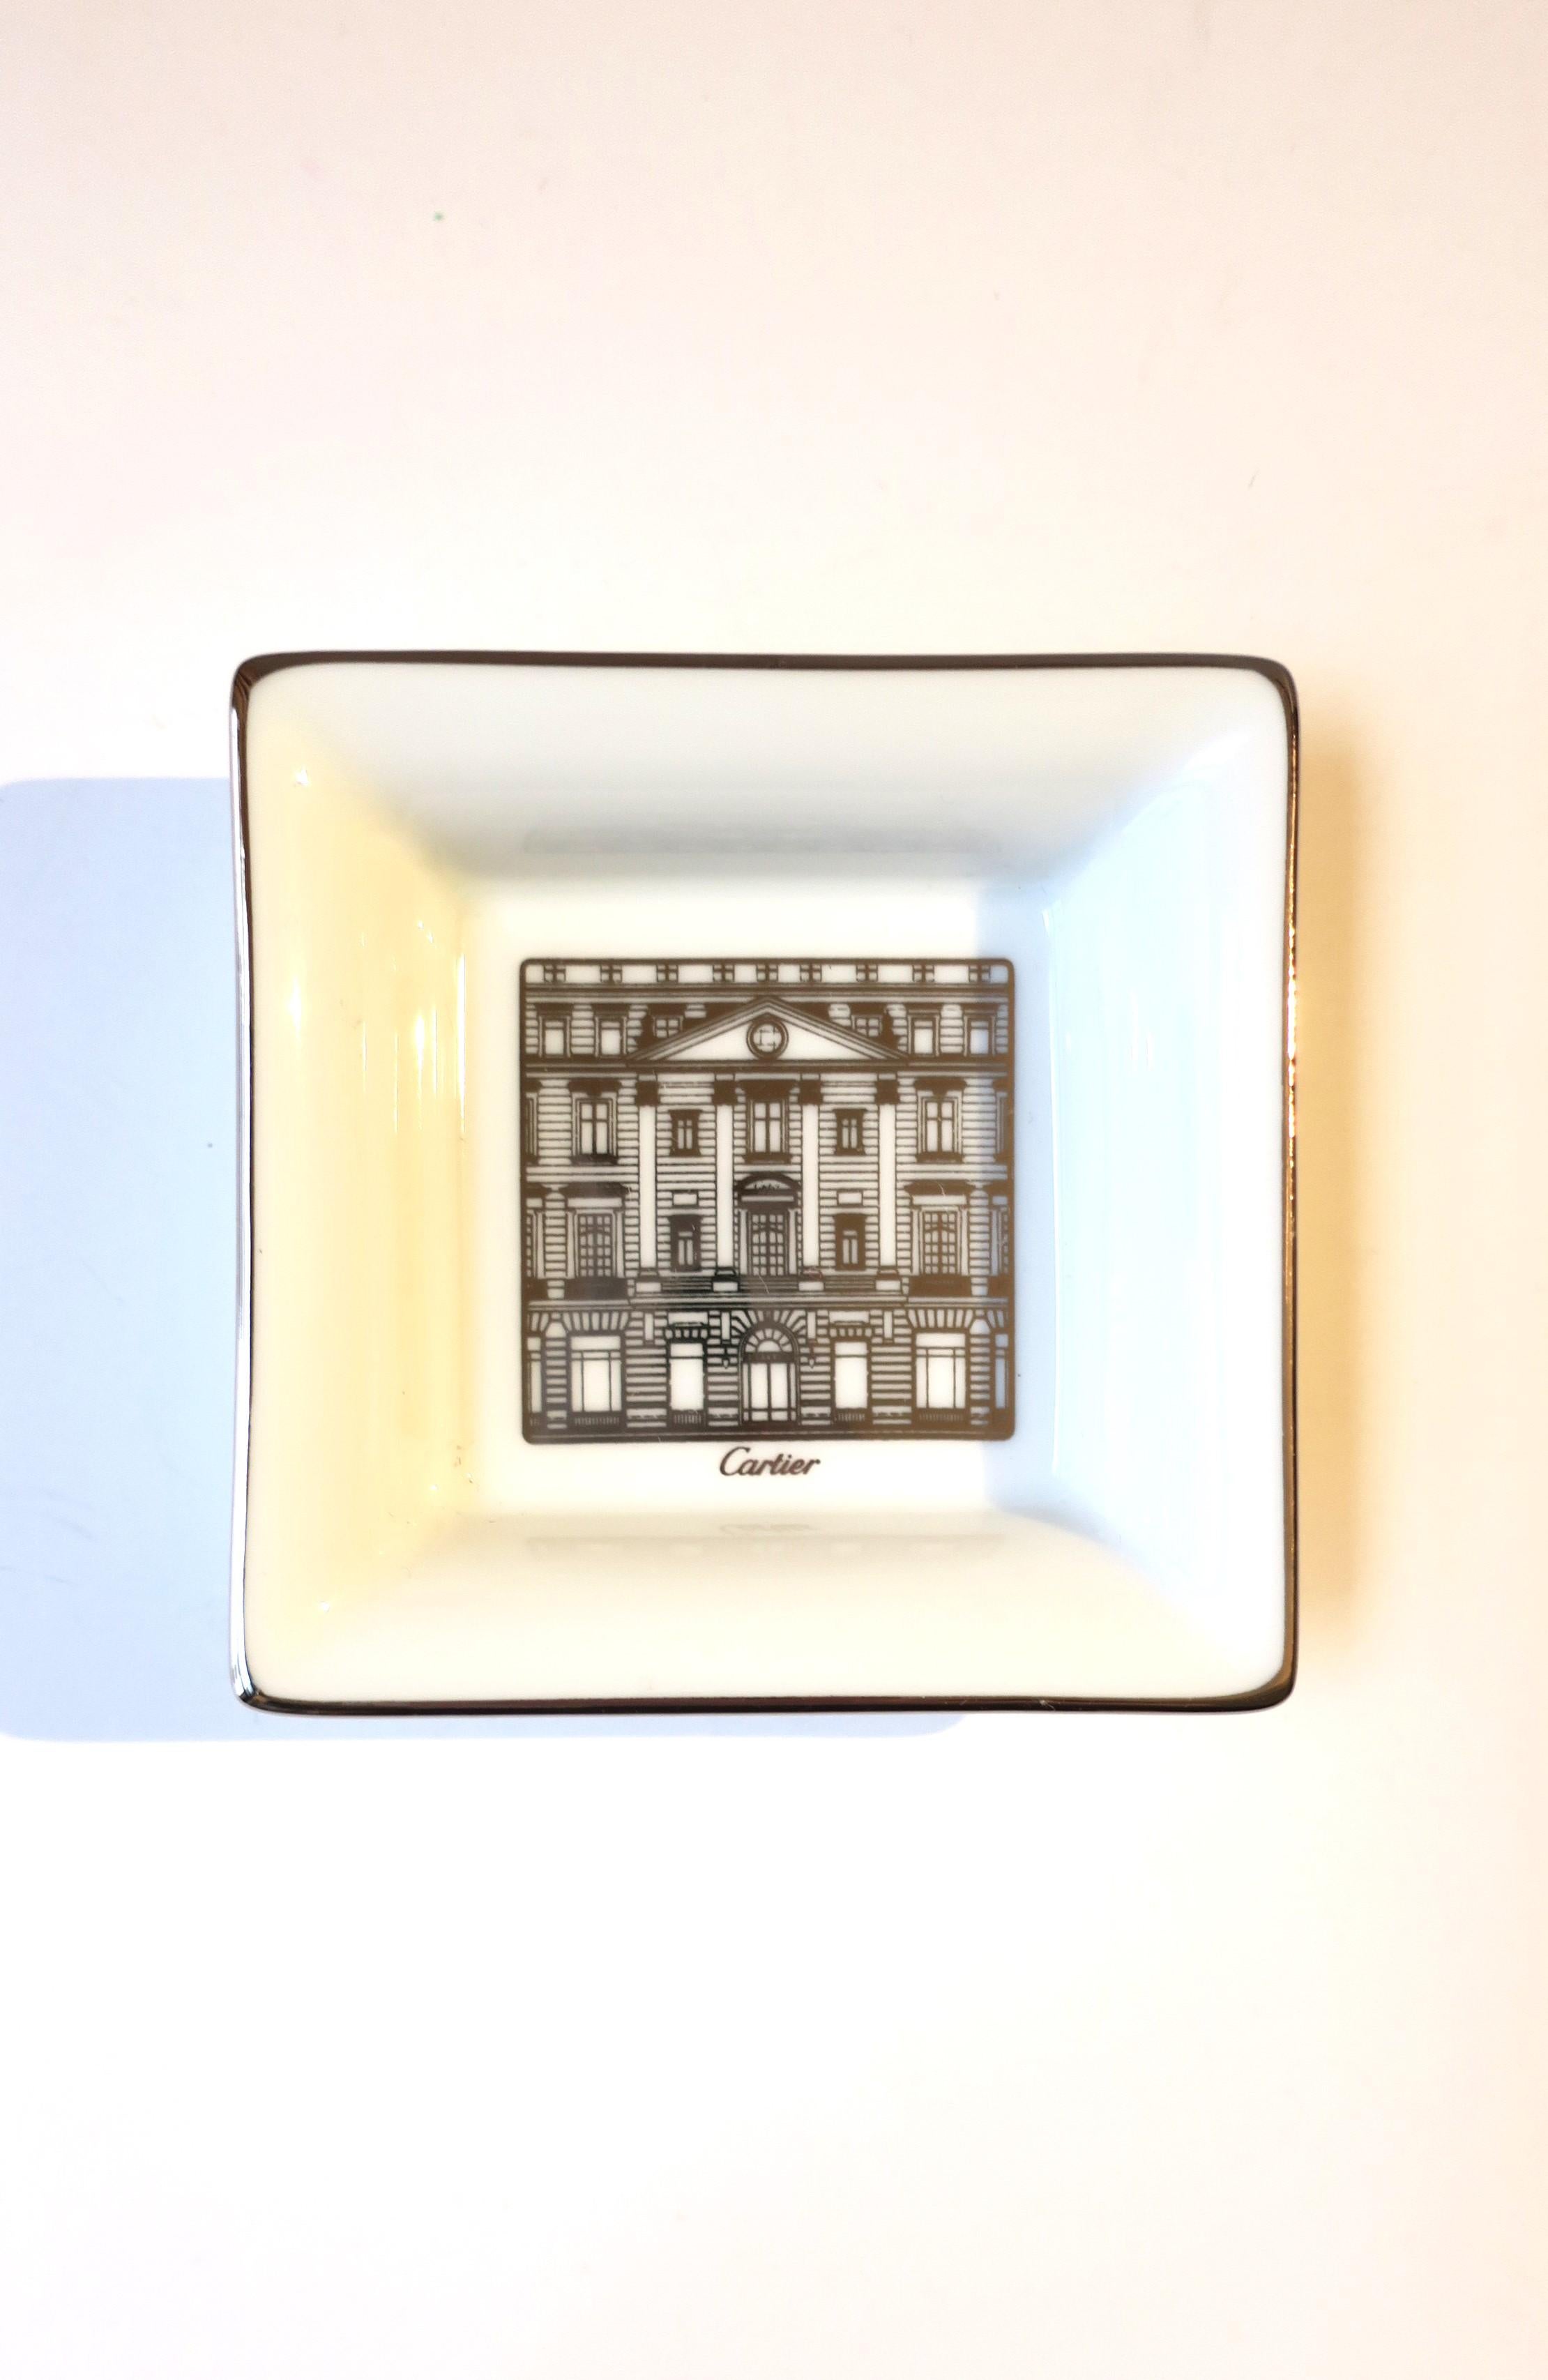 A beautiful piece of fine French porcelain from luxury Maison Cartier, circa late-20th century, France. This small jewelry dish has a silver edge and a fine depiction of the Cartier Mansion, 'Cartier' at bottom of. As described on side of iconic red